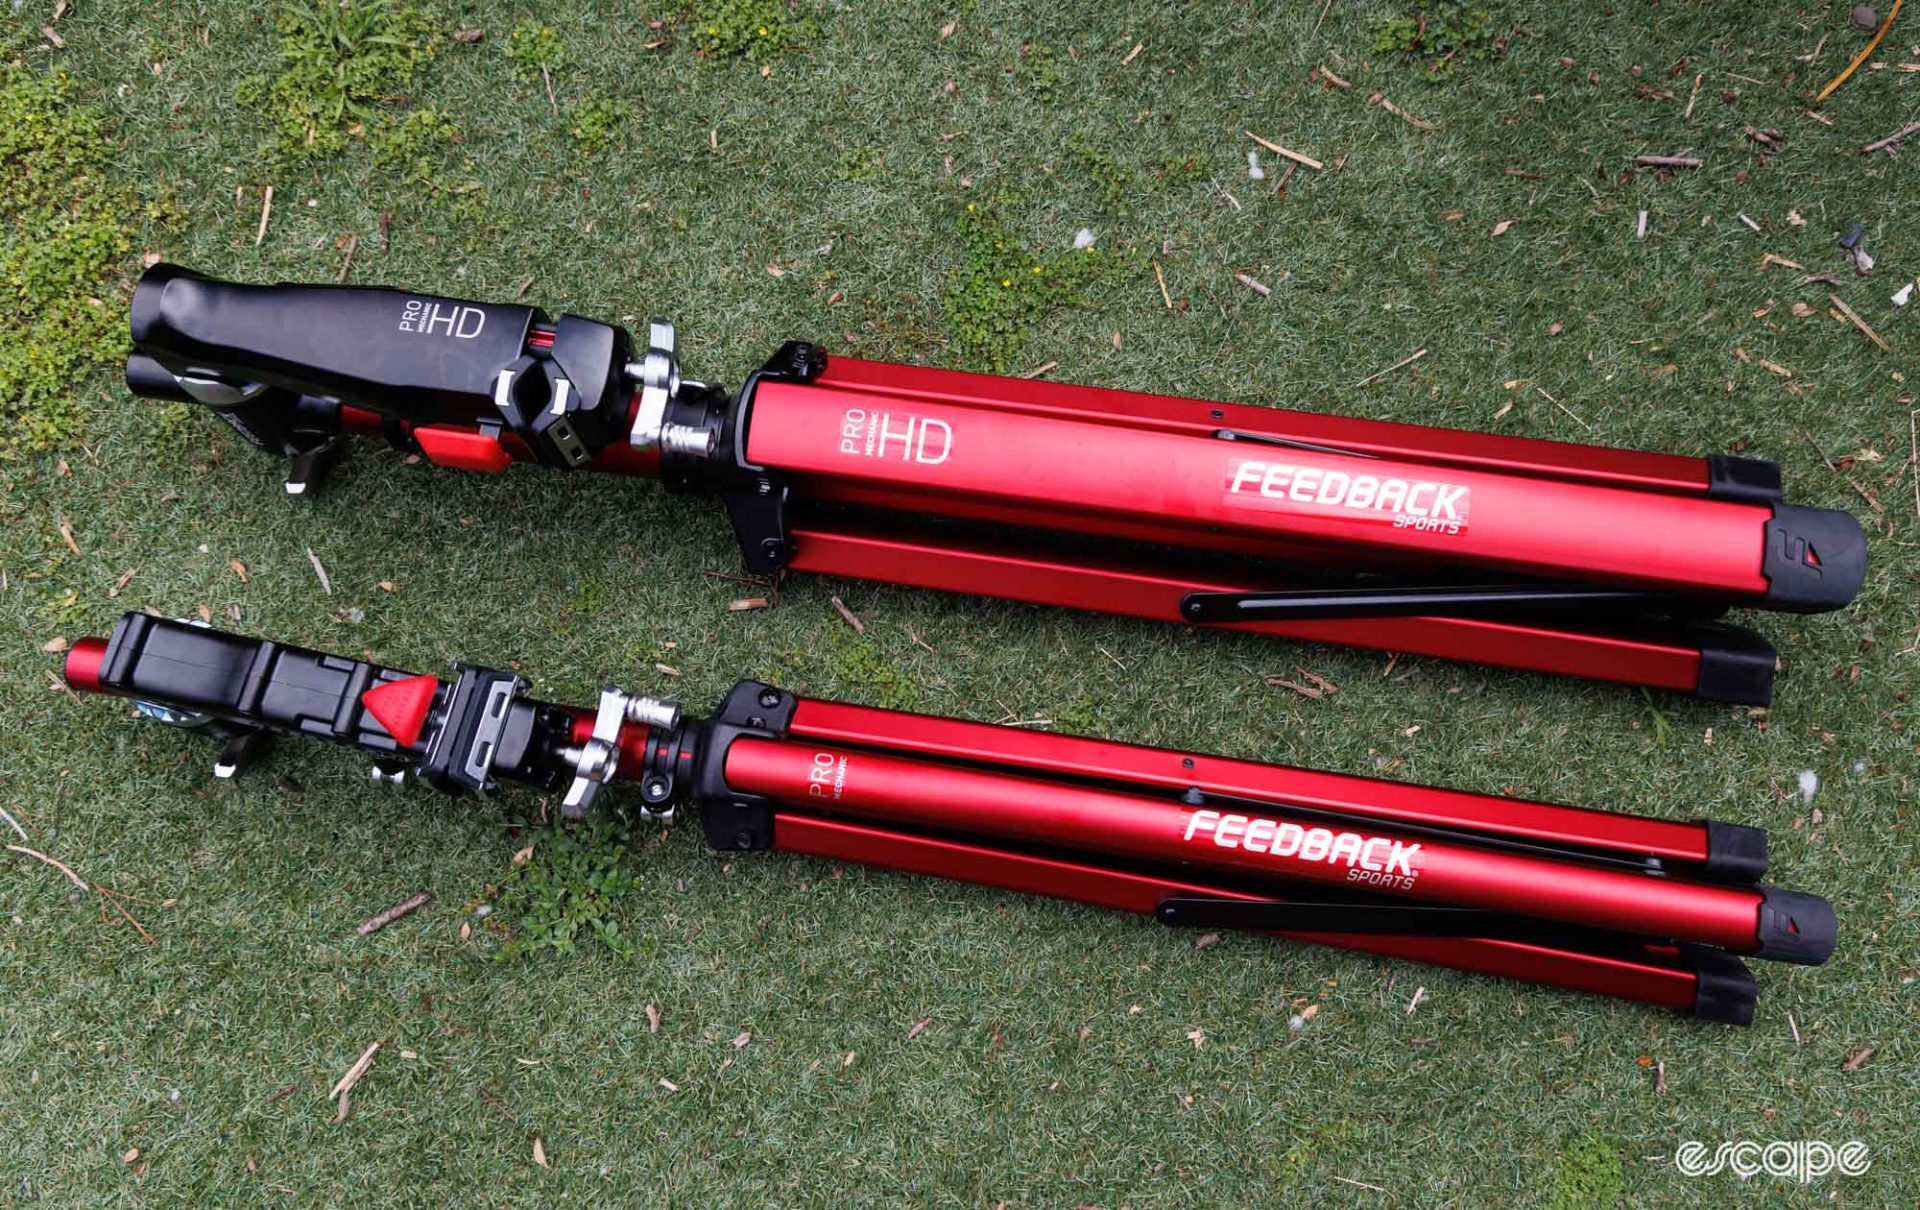 Duplicated photo from above. Feedback Sports Pro Mechanic and Pro Mechanic HD repair stands folded and on the ground. 